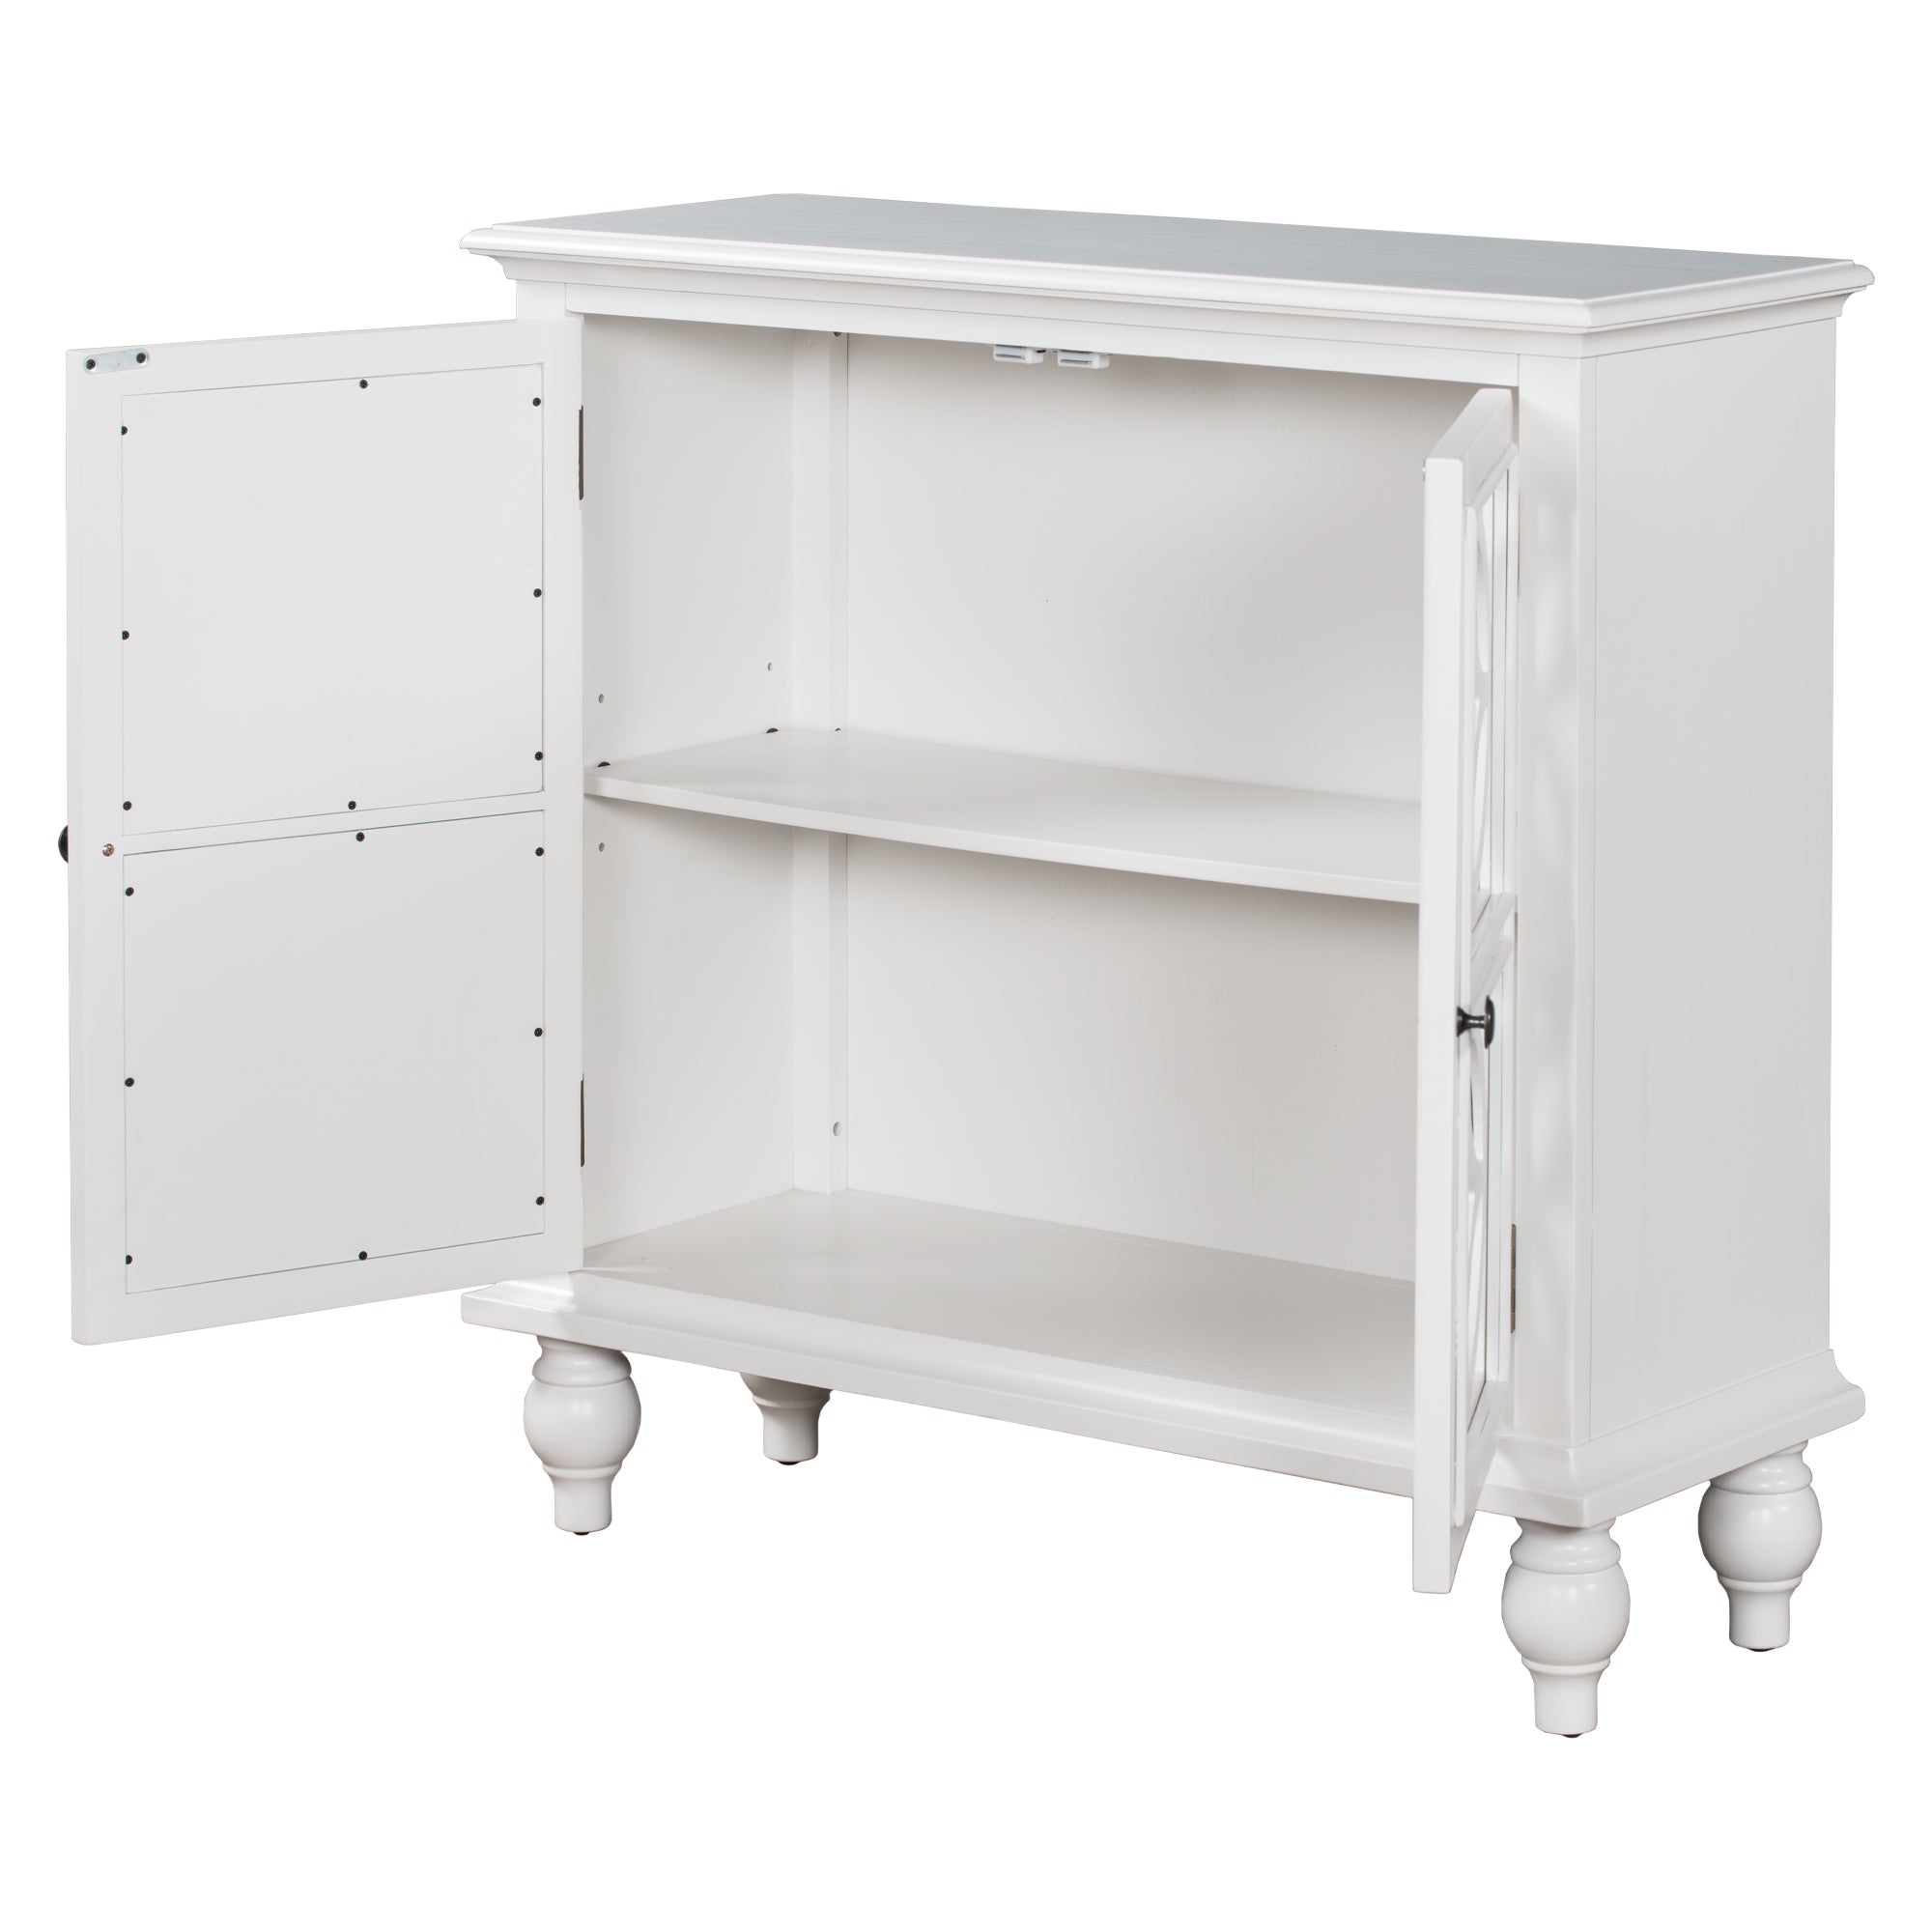 Sideboard Storage Cabinet with Doors and Adjustable Shelf (White)